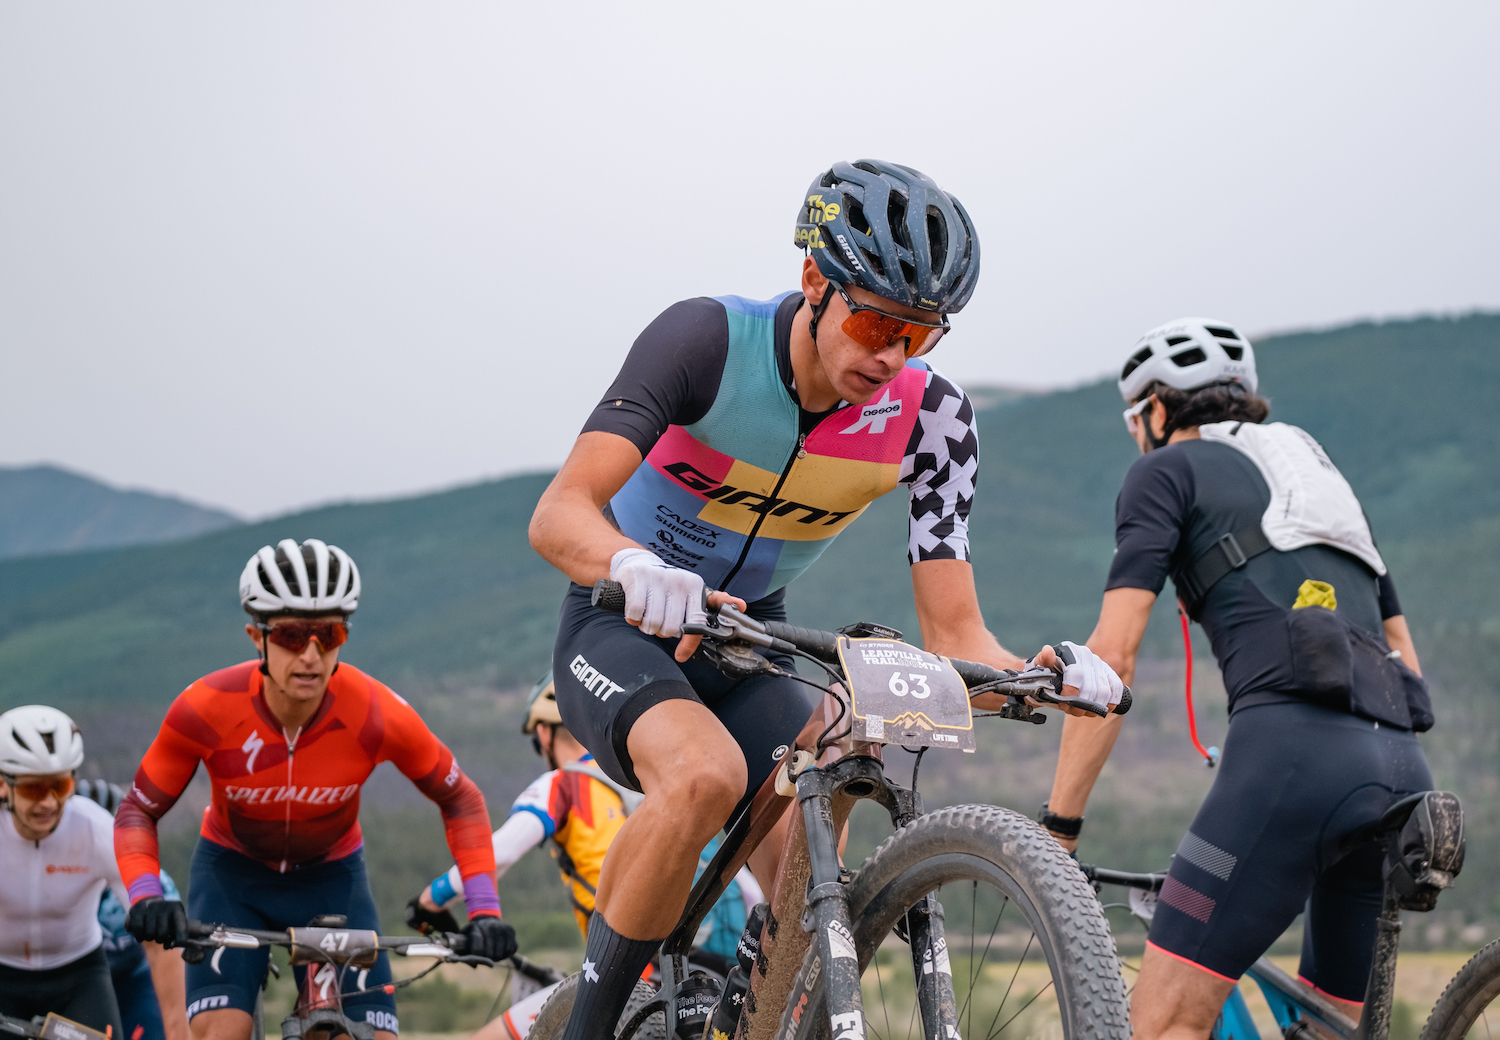 Paton at Leadville, Now 3rd Life Time Series! | Giant Bicycles